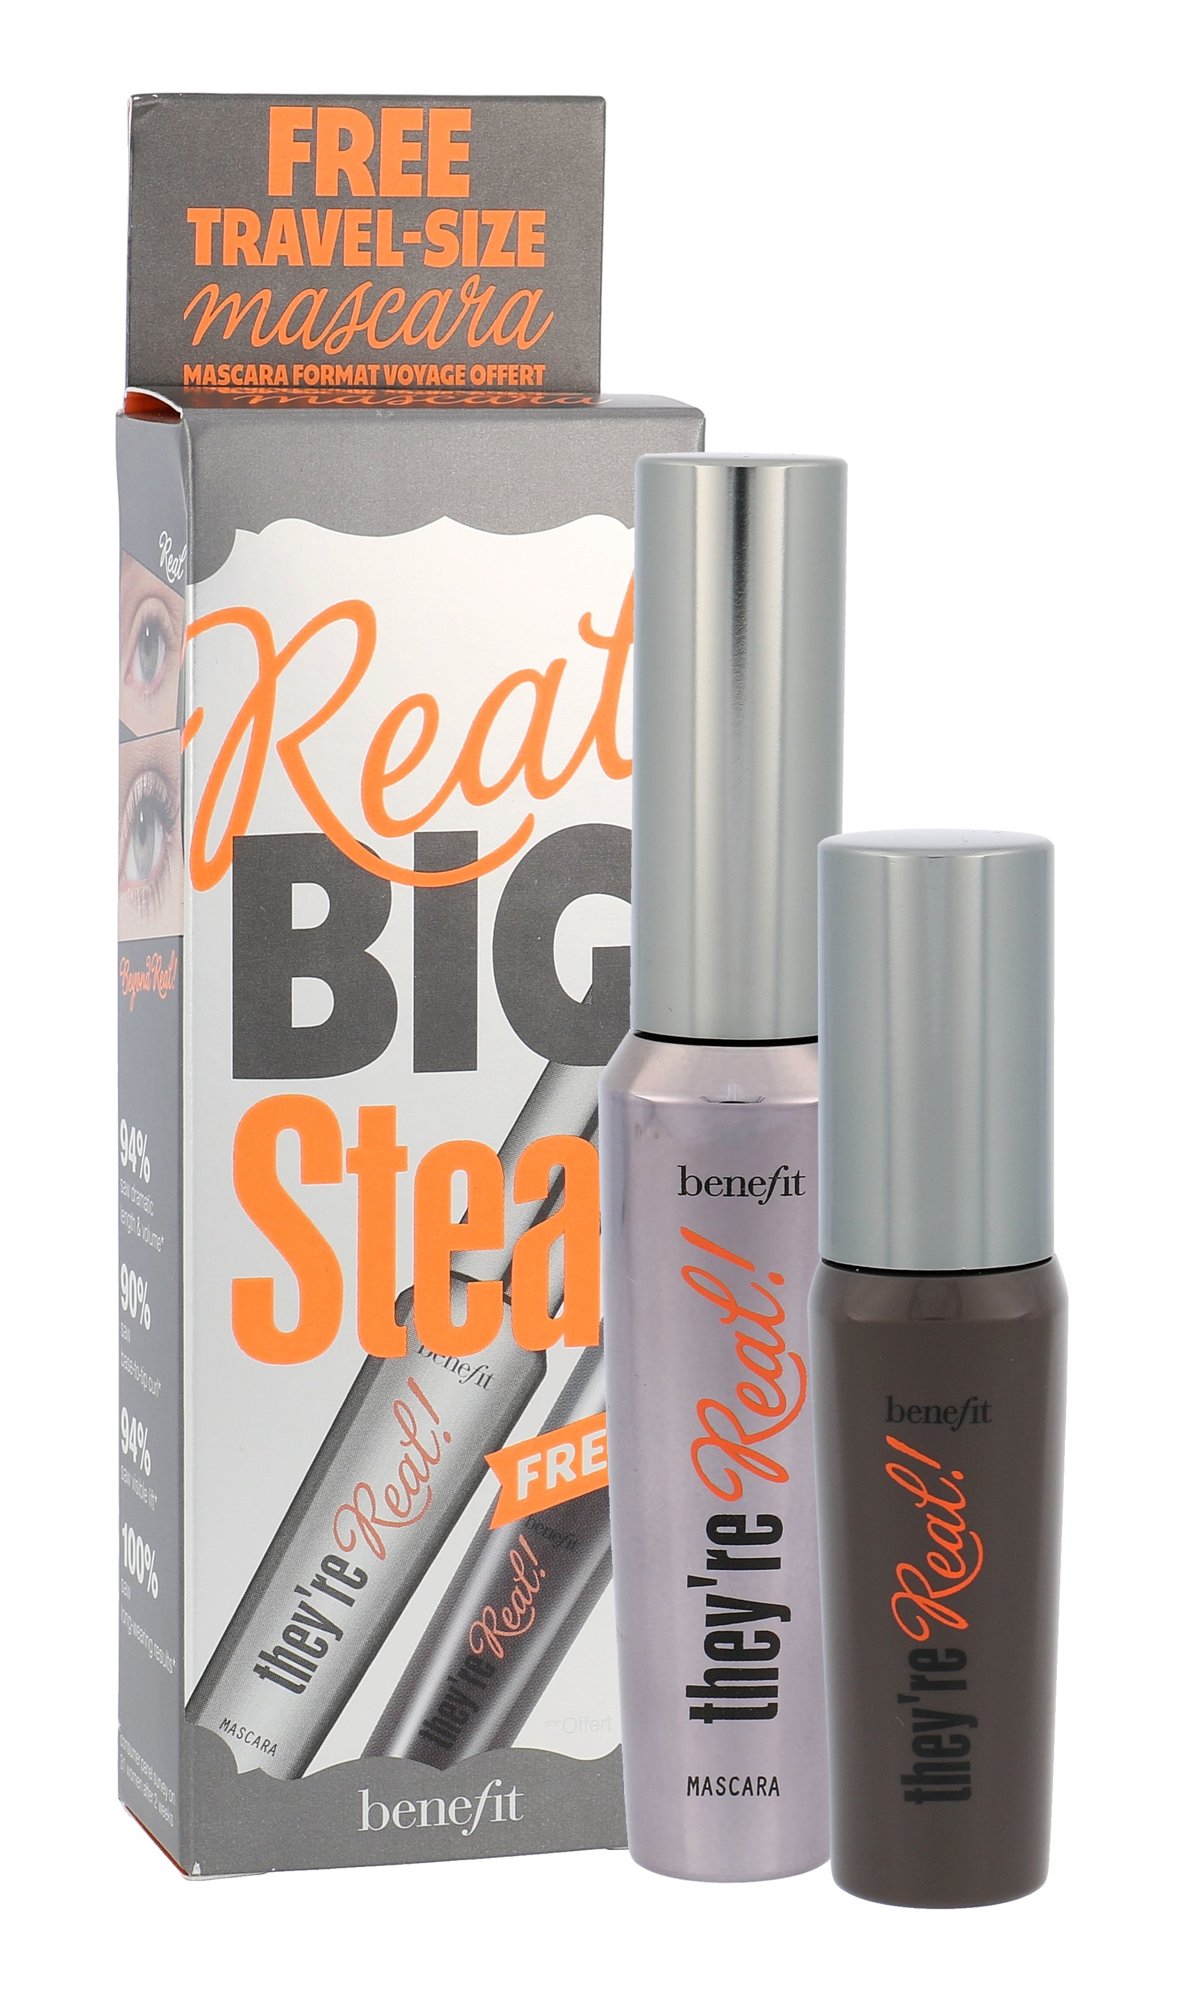 Benefit They´re Real! 8,5g Mascara They´re Real! 8,5 g + Mascara They´re Real! 4 g Black blakstienų tušas Rinkinys